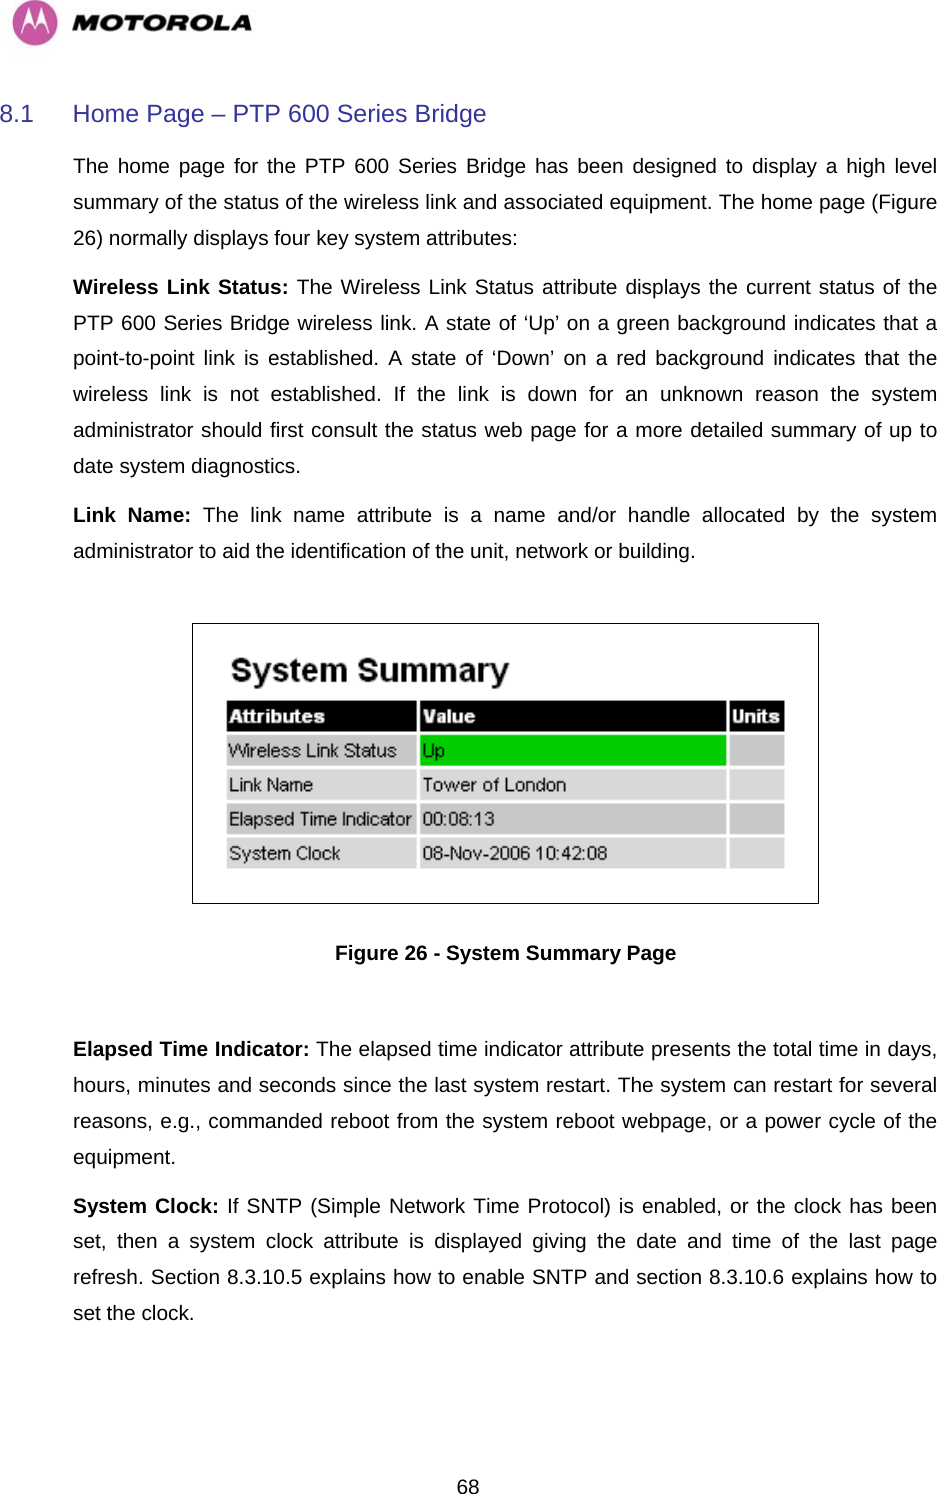   688.1  Home Page – PTP 600 Series Bridge The home page for the PTP 600 Series Bridge has been designed to display a high level summary of the status of the wireless link and associated equipment. The home page (Figure 26) normally displays four key system attributes: Wireless Link Status: The Wireless Link Status attribute displays the current status of the PTP 600 Series Bridge wireless link. A state of ‘Up’ on a green background indicates that a point-to-point link is established. A state of ‘Down’ on a red background indicates that the wireless link is not established. If the link is down for an unknown reason the system administrator should first consult the status web page for a more detailed summary of up to date system diagnostics.  Link Name: The link name attribute is a name and/or handle allocated by the system administrator to aid the identification of the unit, network or building.    Figure 26 - System Summary Page  Elapsed Time Indicator: The elapsed time indicator attribute presents the total time in days, hours, minutes and seconds since the last system restart. The system can restart for several reasons, e.g., commanded reboot from the system reboot webpage, or a power cycle of the equipment.  System Clock: If SNTP (Simple Network Time Protocol) is enabled, or the clock has been set, then a system clock attribute is displayed giving the date and time of the last page refresh. Section 8.3.10.5 explains how to enable SNTP and section 8.3.10.6 explains how to set the clock. 